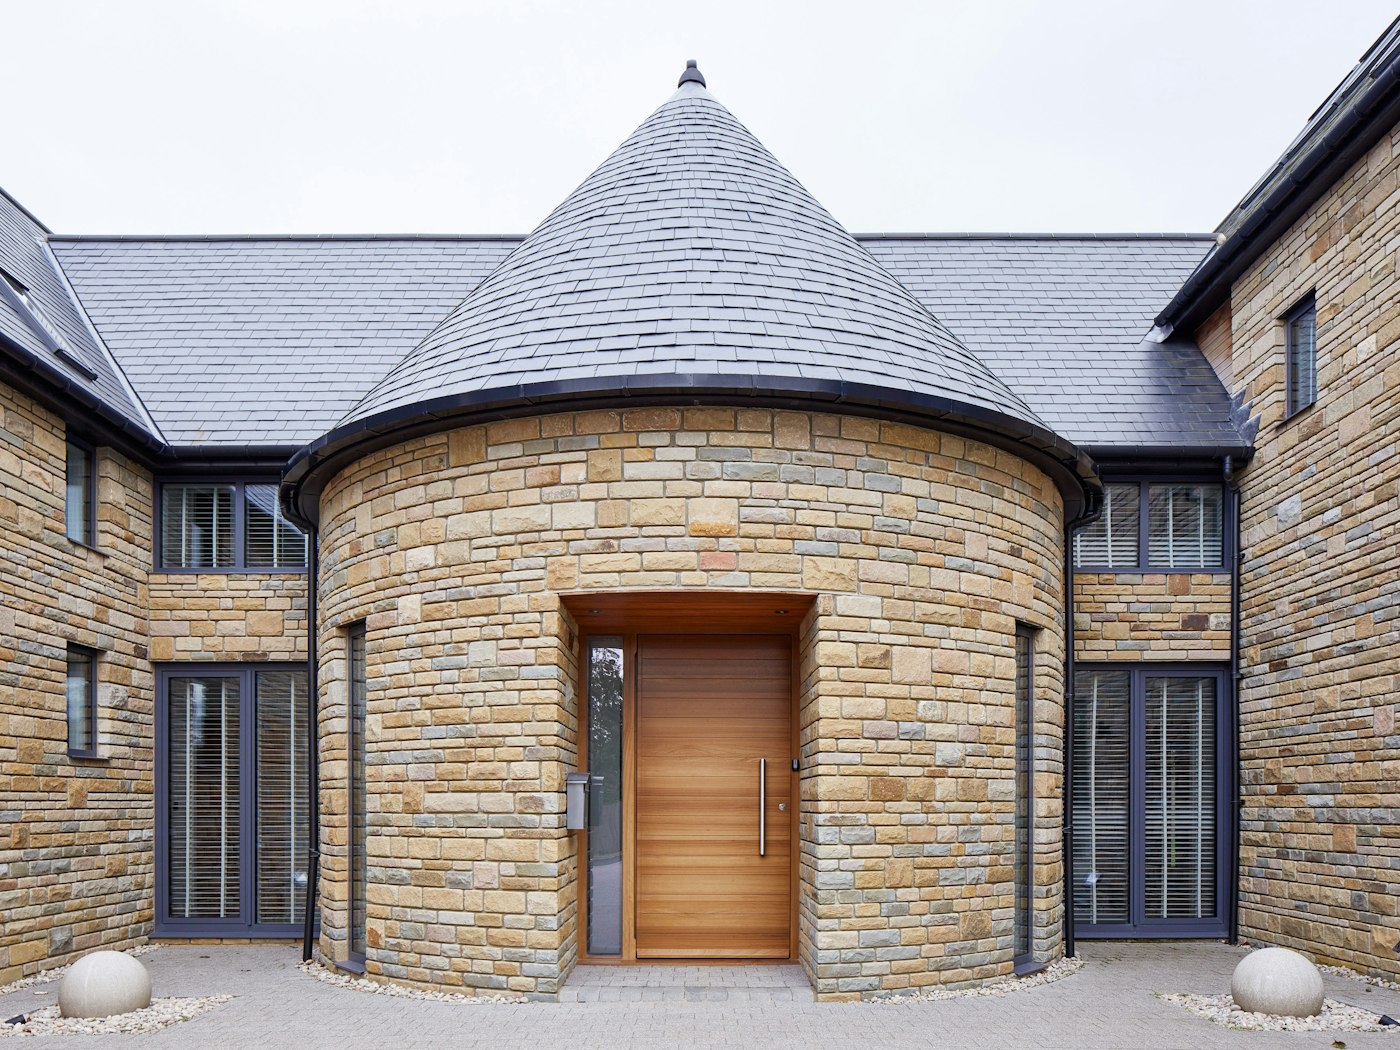 The iroko front door contrasts against the lighter stone in this house